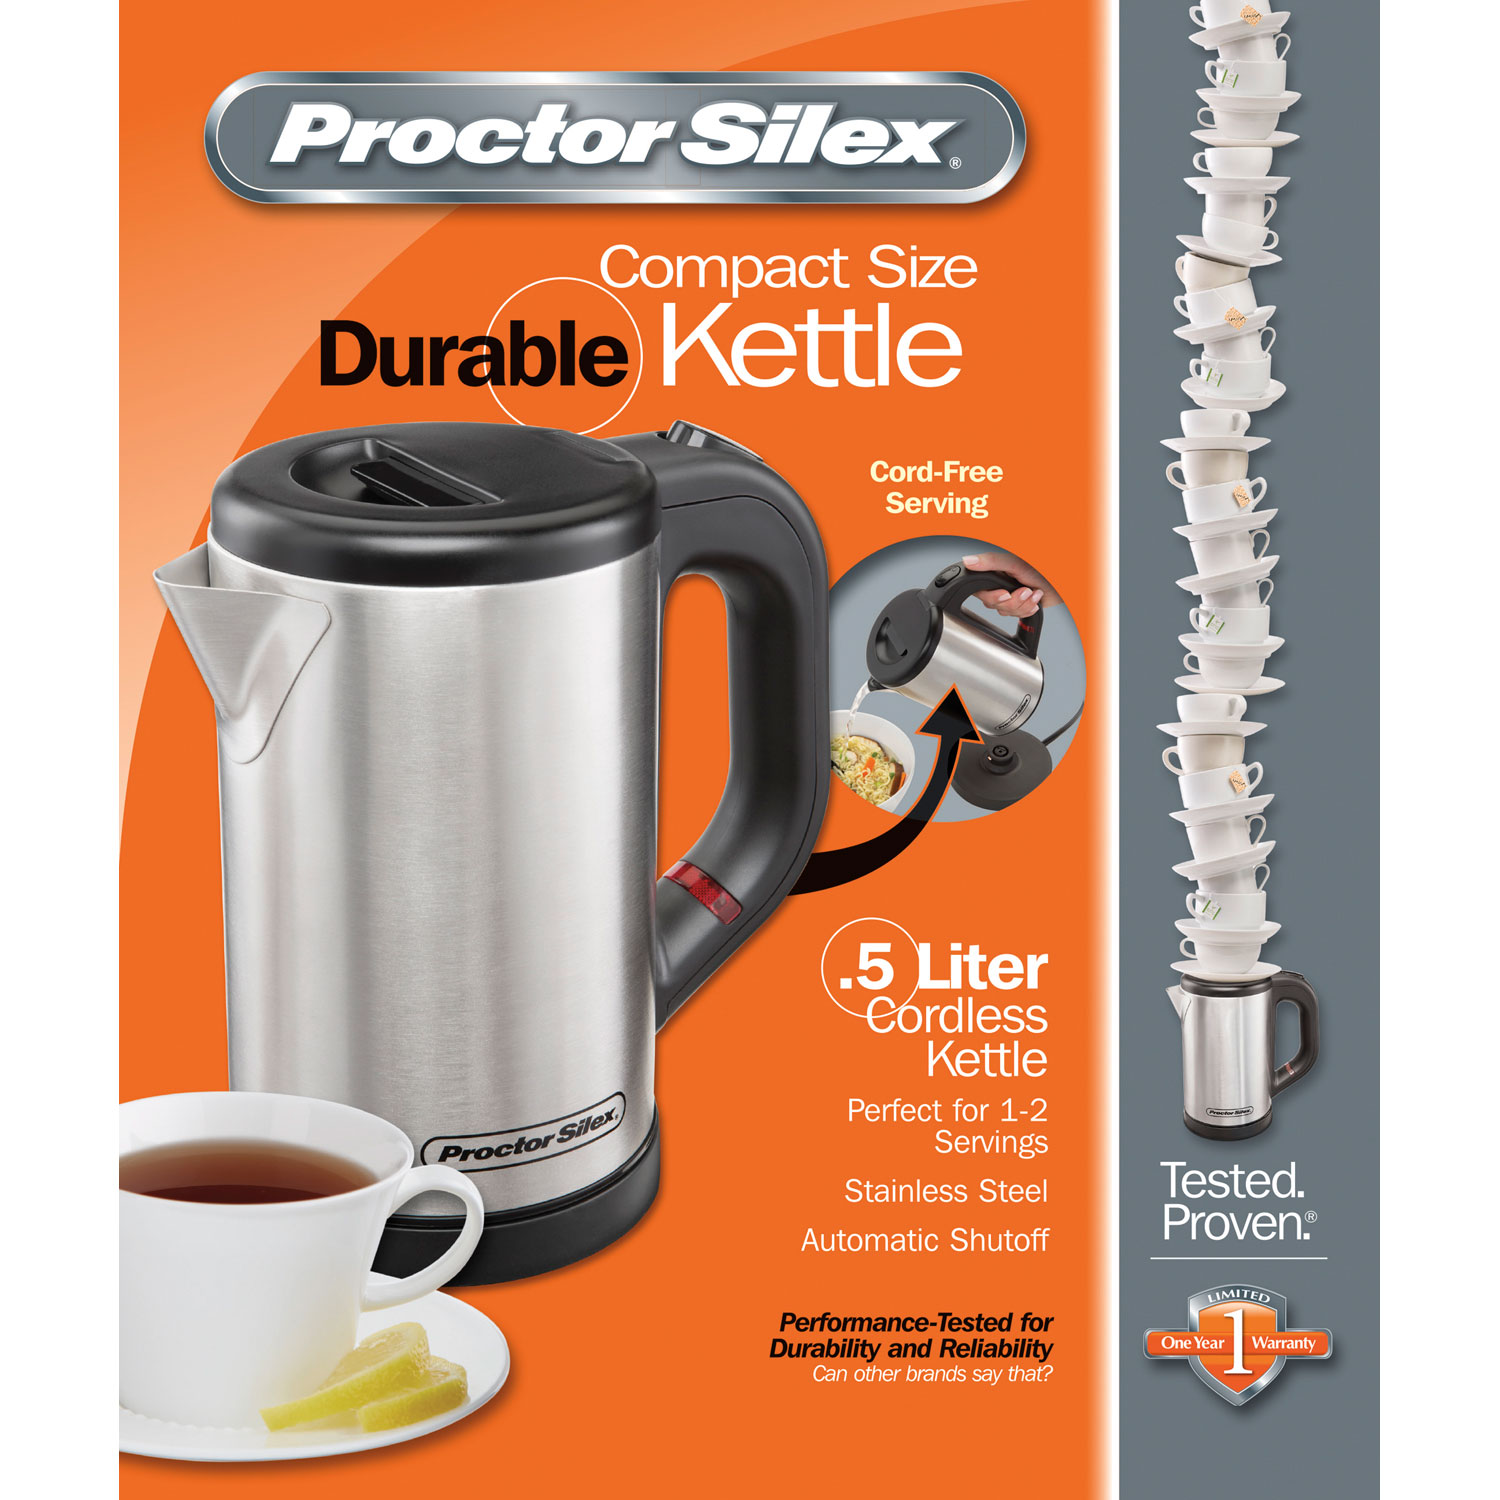 Compact .5 Liter Cordless Kettle 